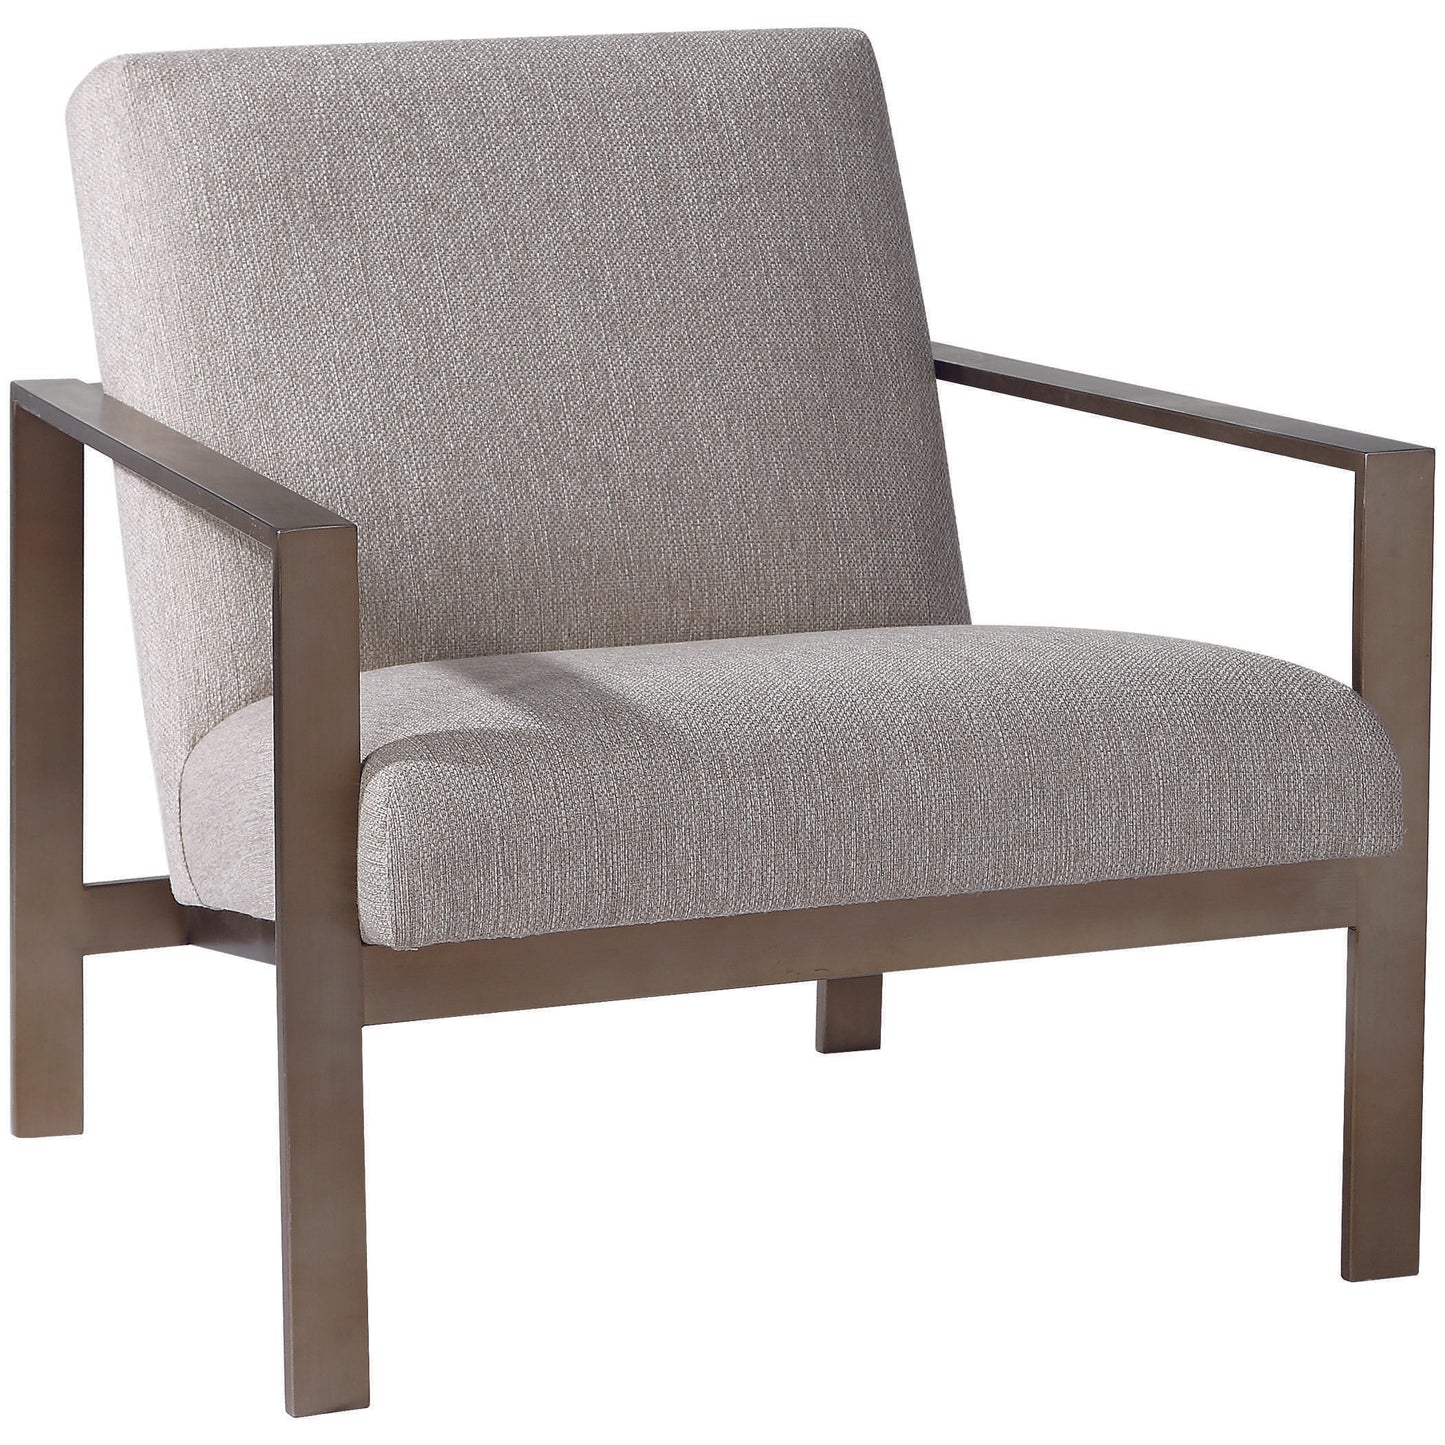 Wills 30 inch Contemporary Accent Chair Item 23525